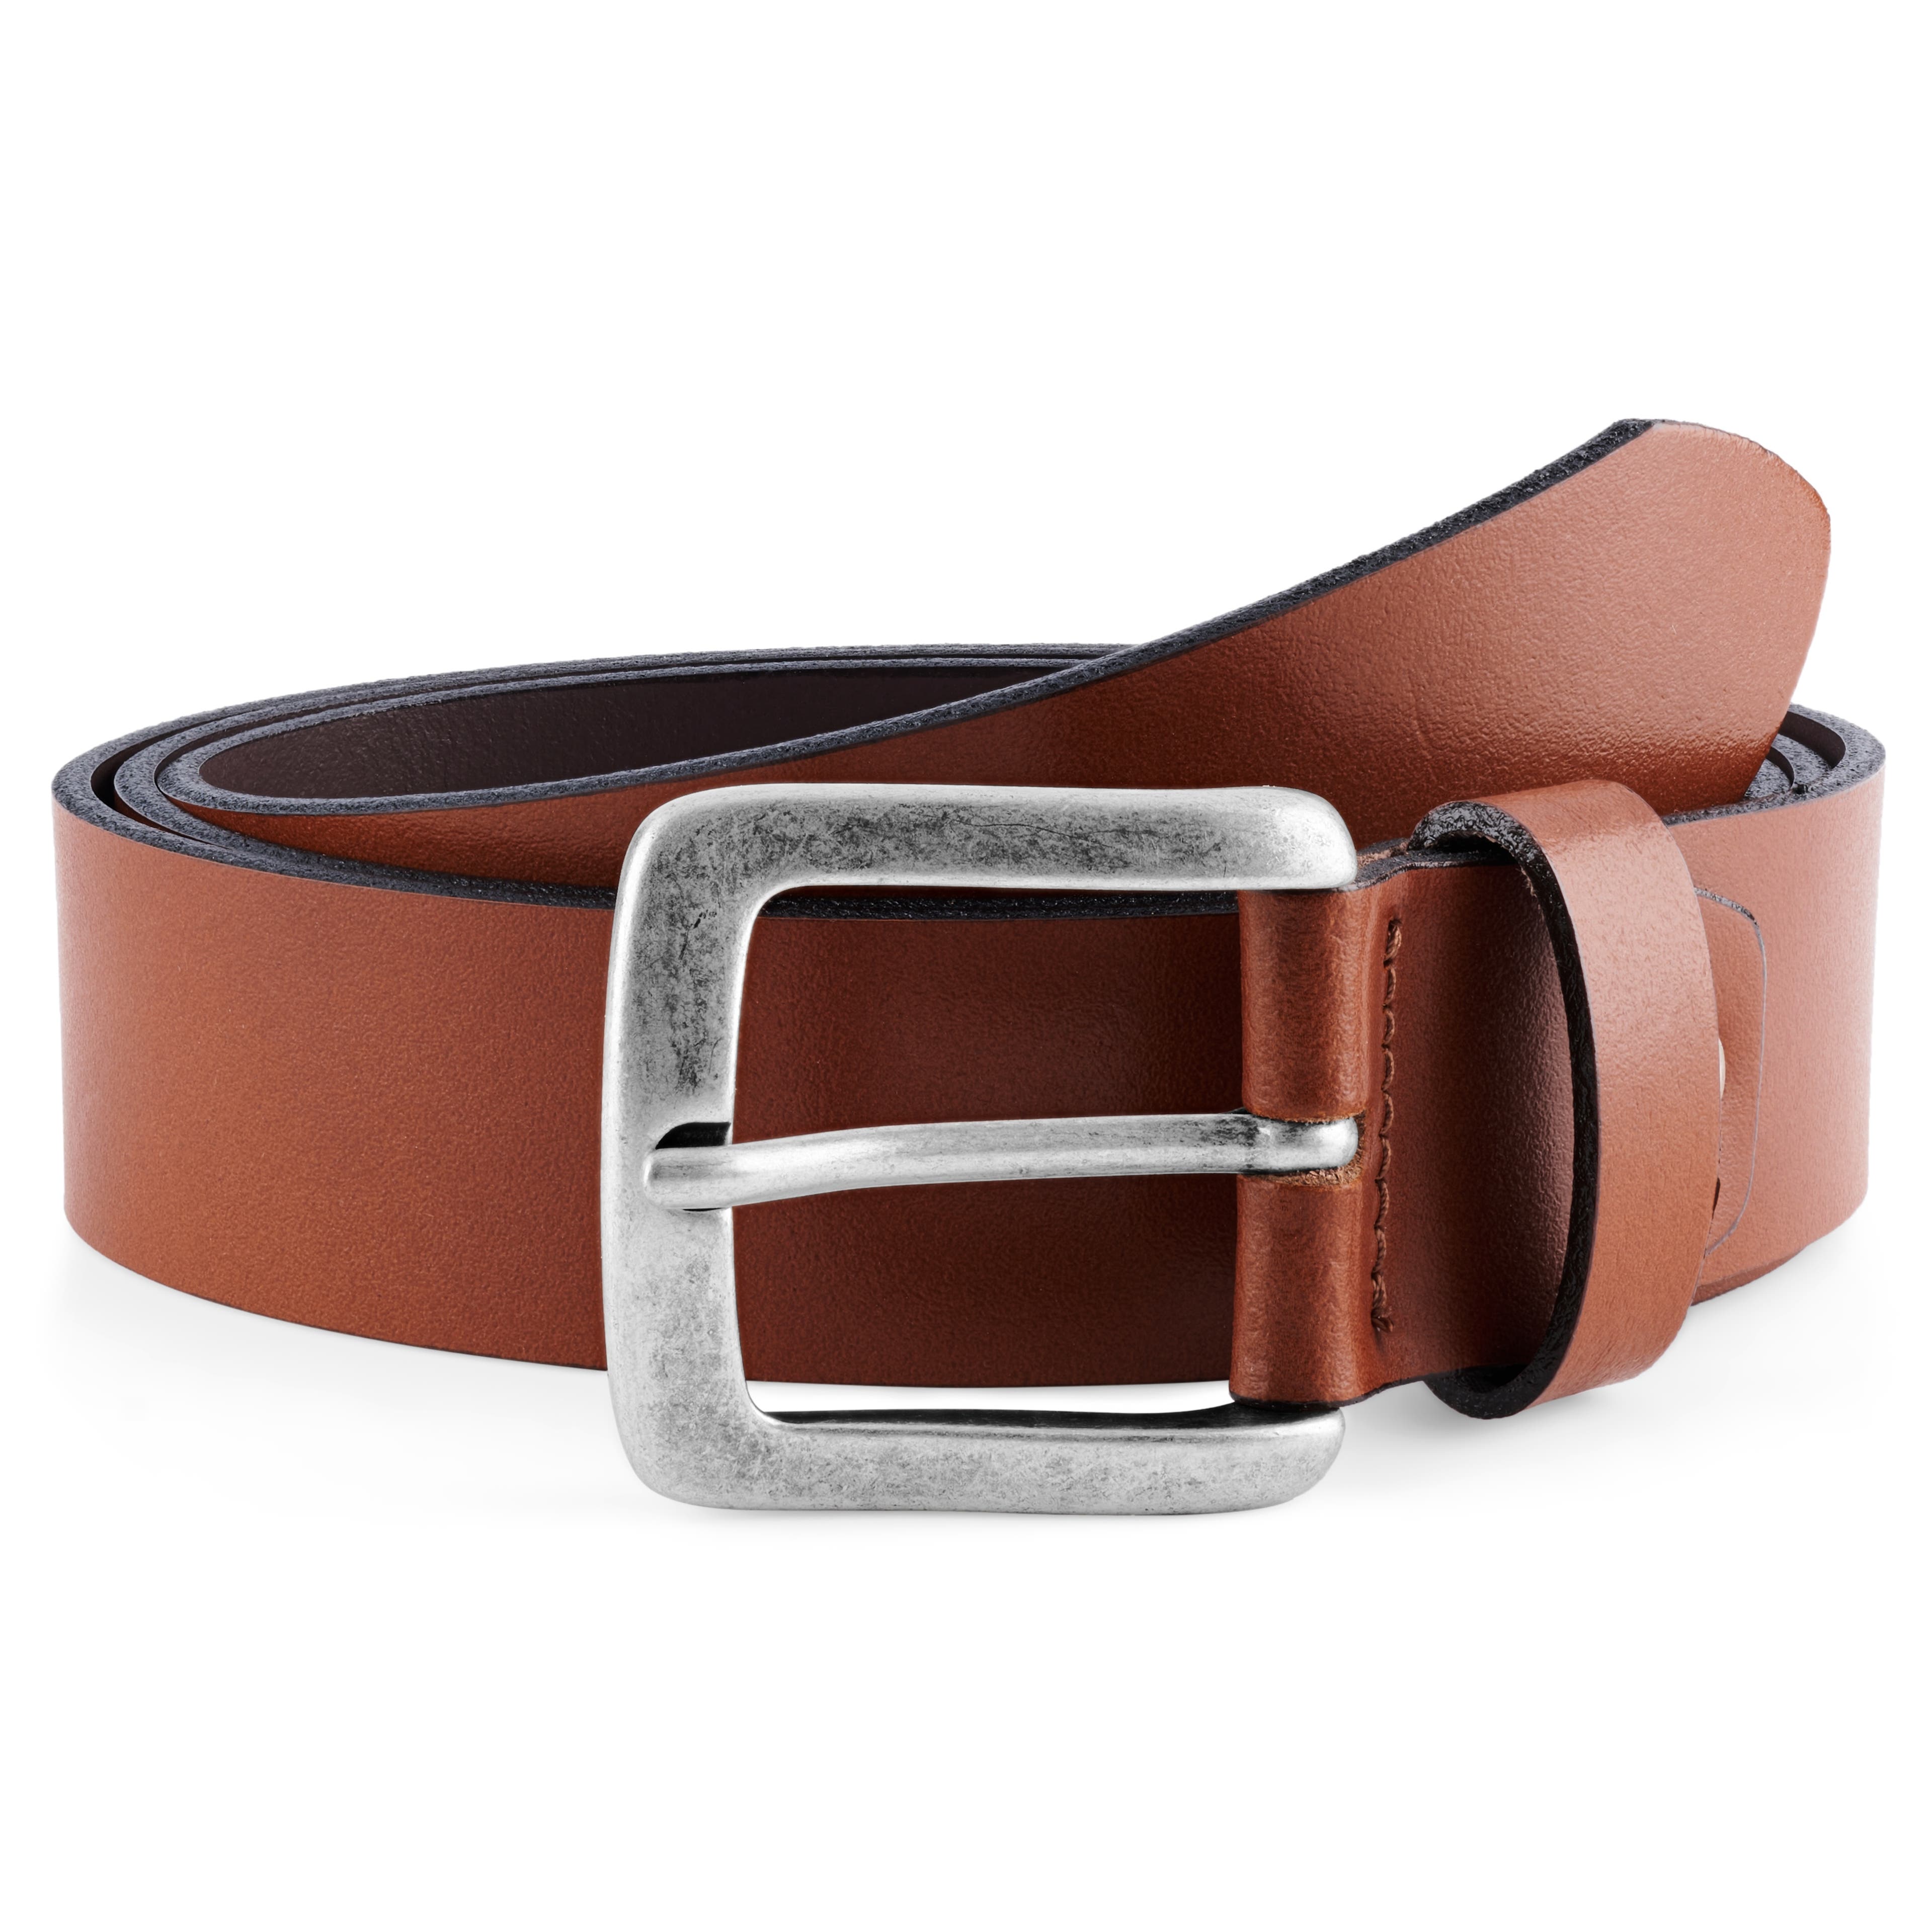 Distressed Tanned Top Grain Leather Belt